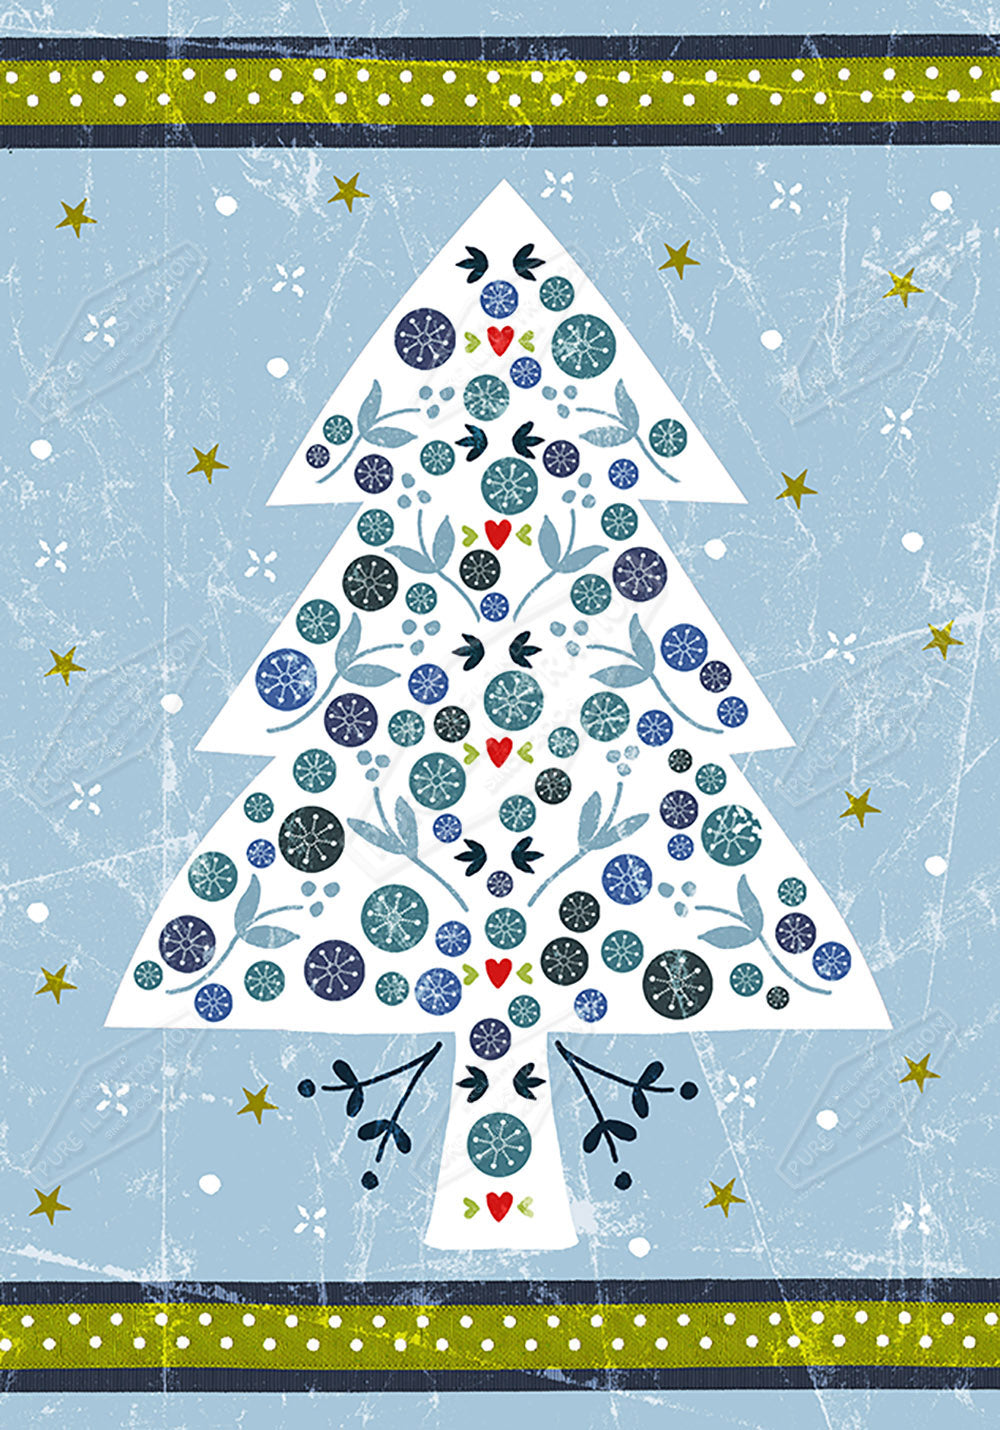 00024245SSN- Sian Summerhayes is represented by Pure Art Licensing Agency - Christmas Greeting Card Design